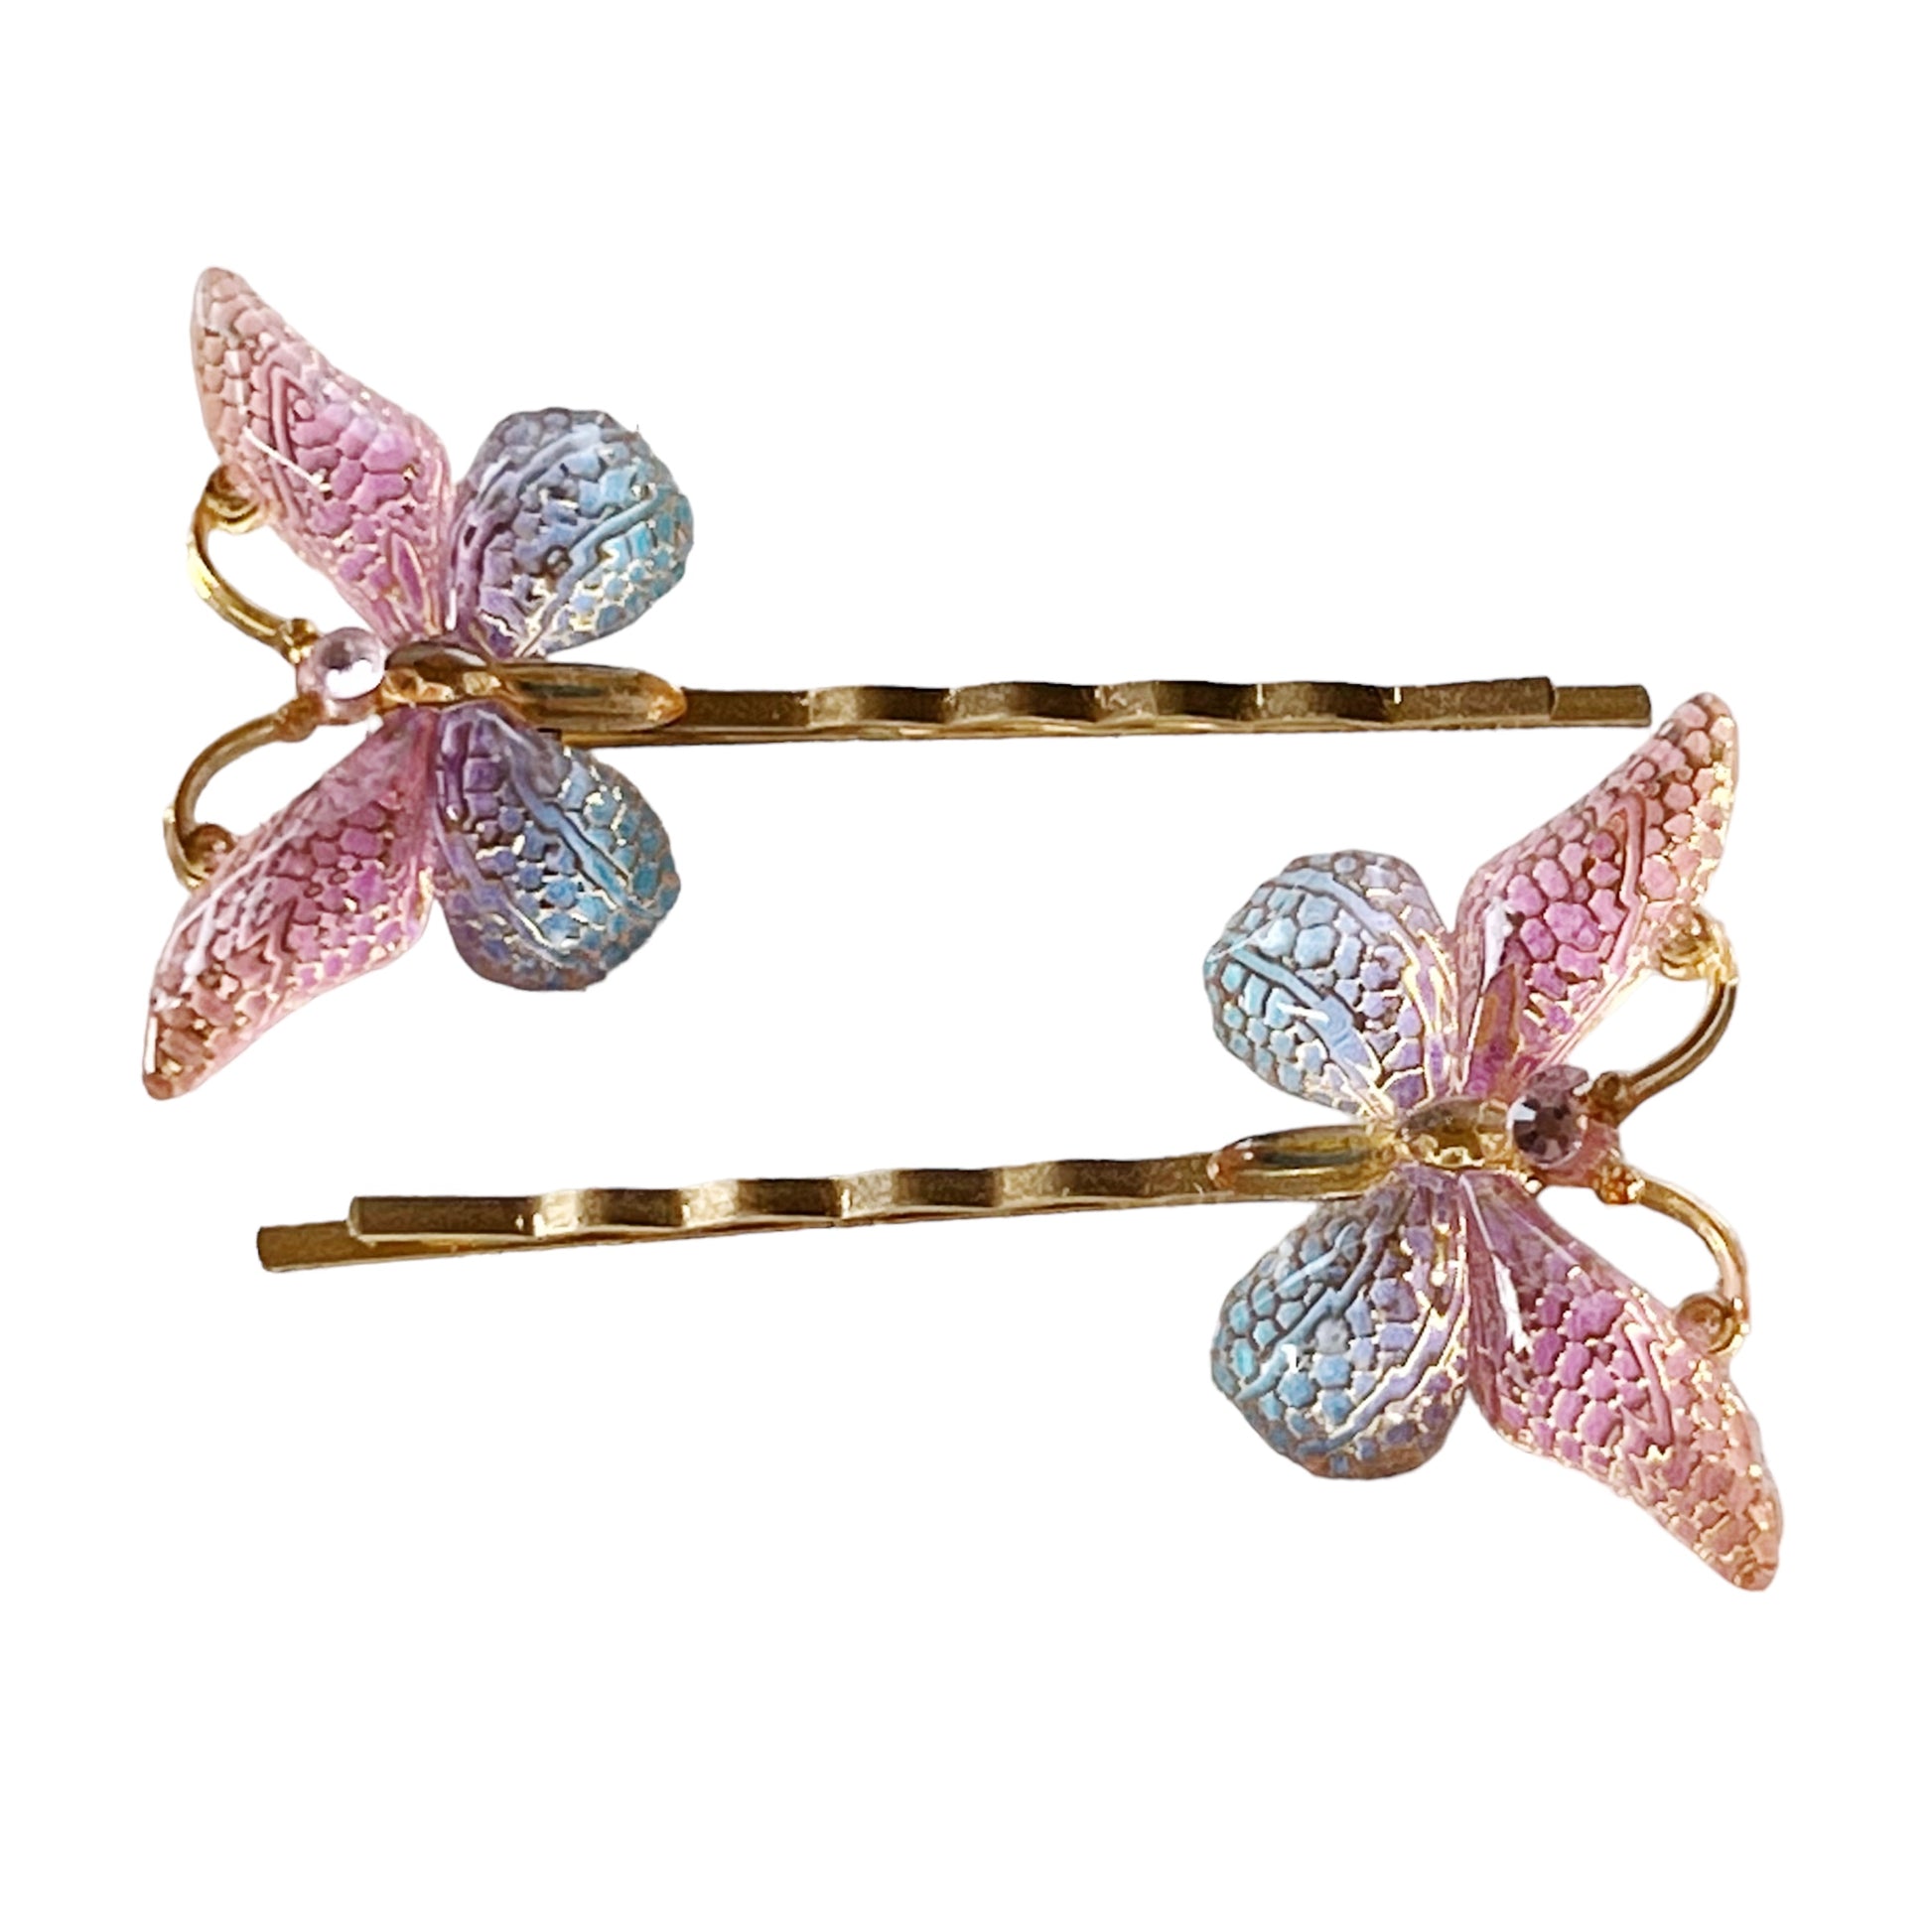 Large Acrylic Butterfly Hair Pins: Vibrant Pink, Blue & Gold tones with Rhinestone Accents for Statement Hairstyles